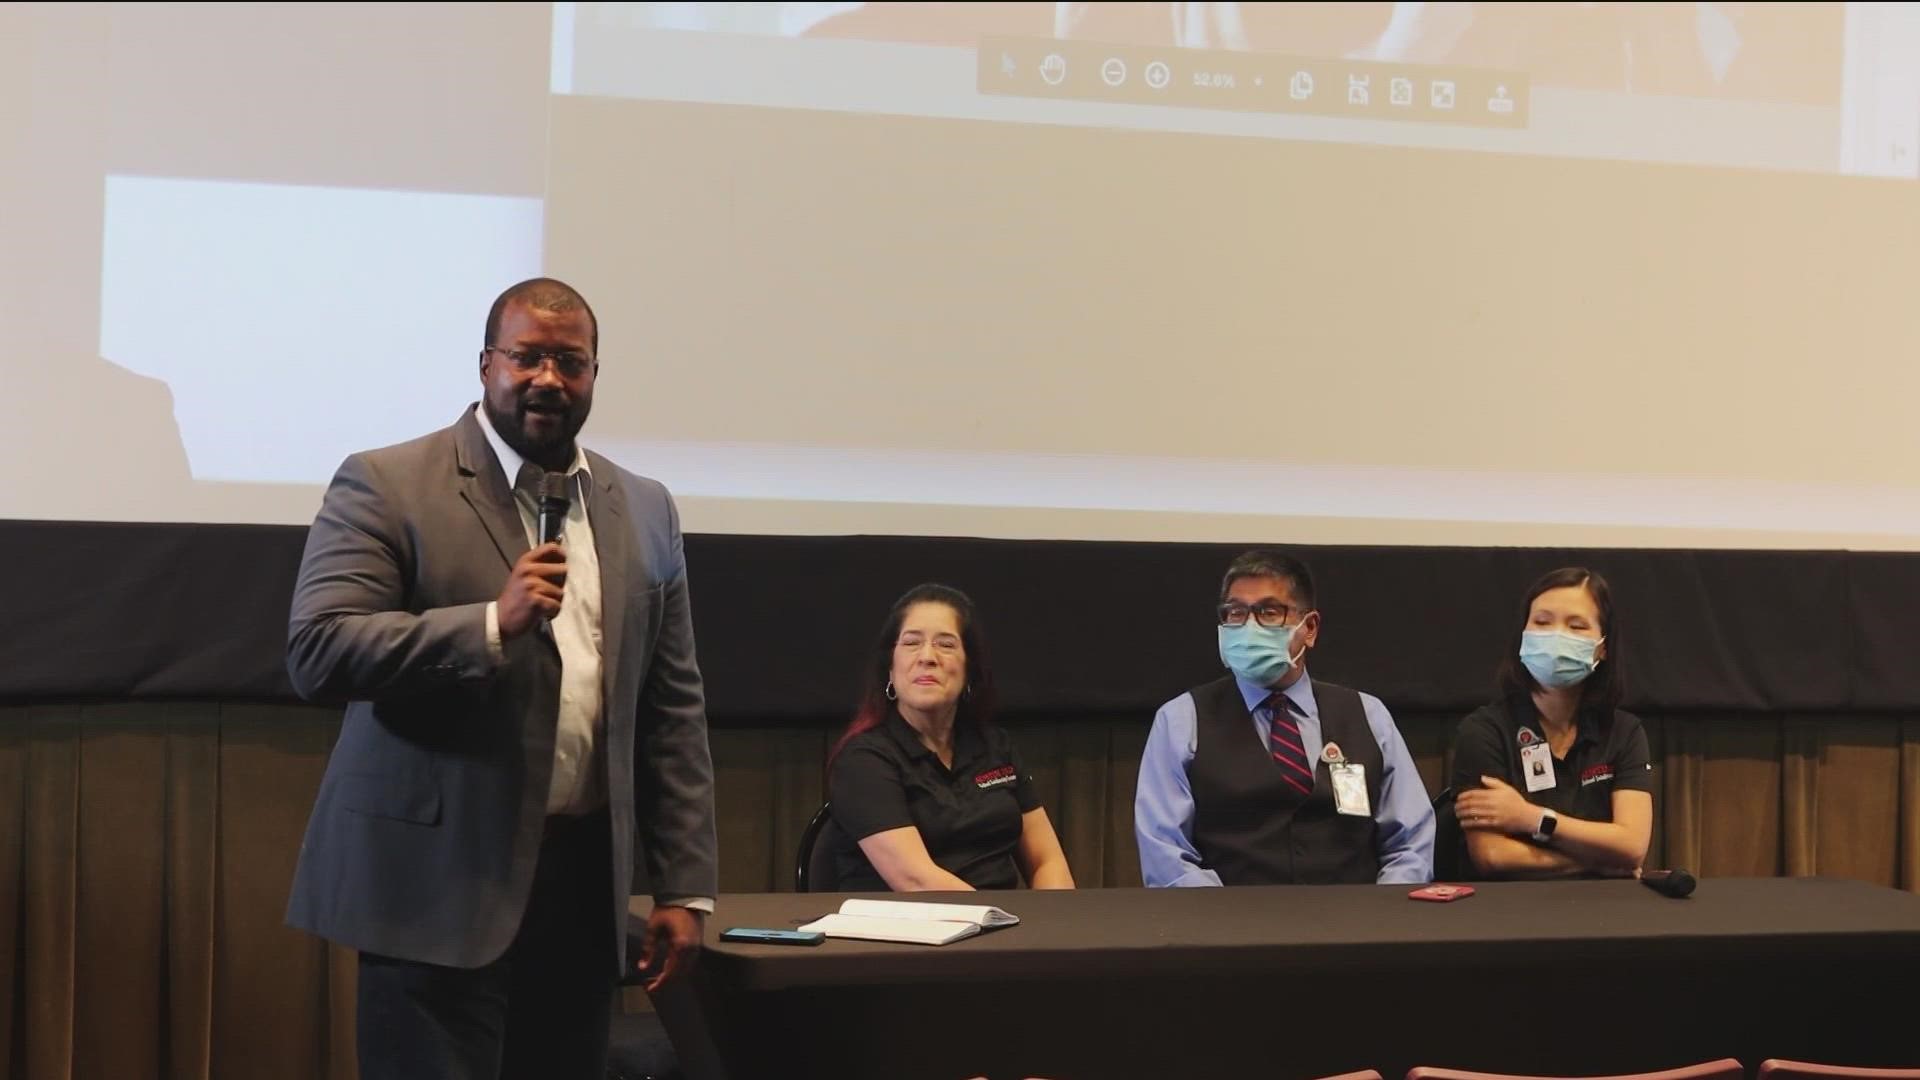 The local groups hosted the meeting to address the educational disparities seen in Austin ISD.